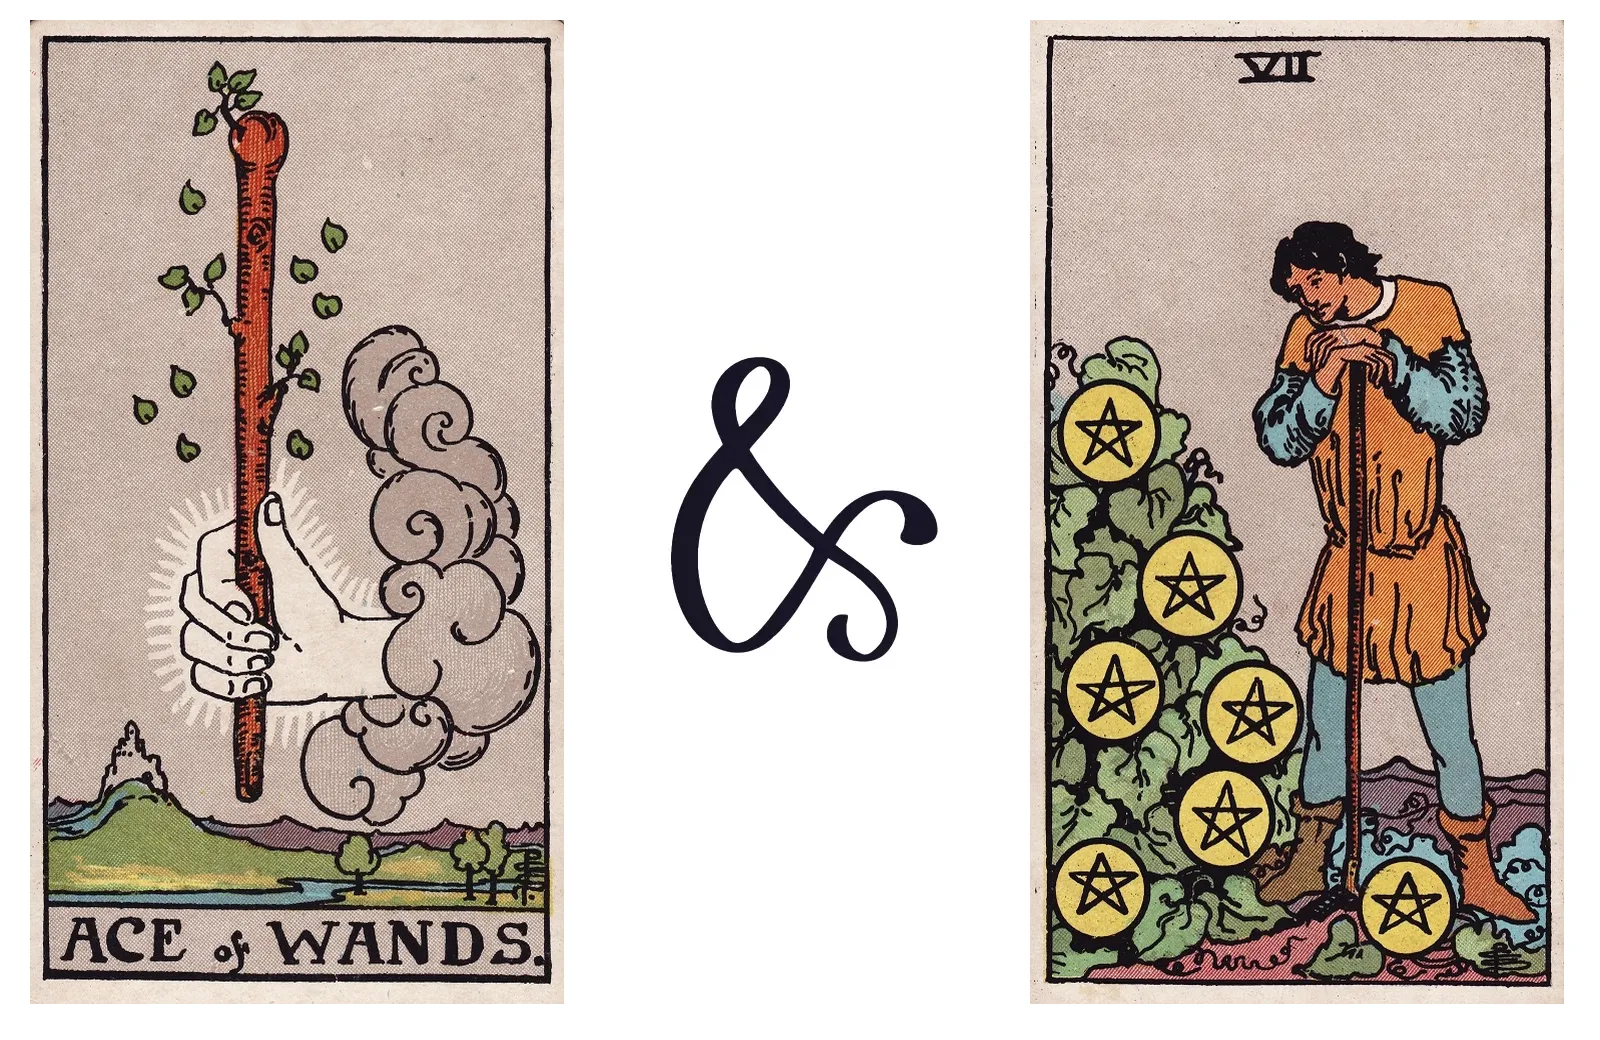 Ace of Wands and Seven of Pentacles